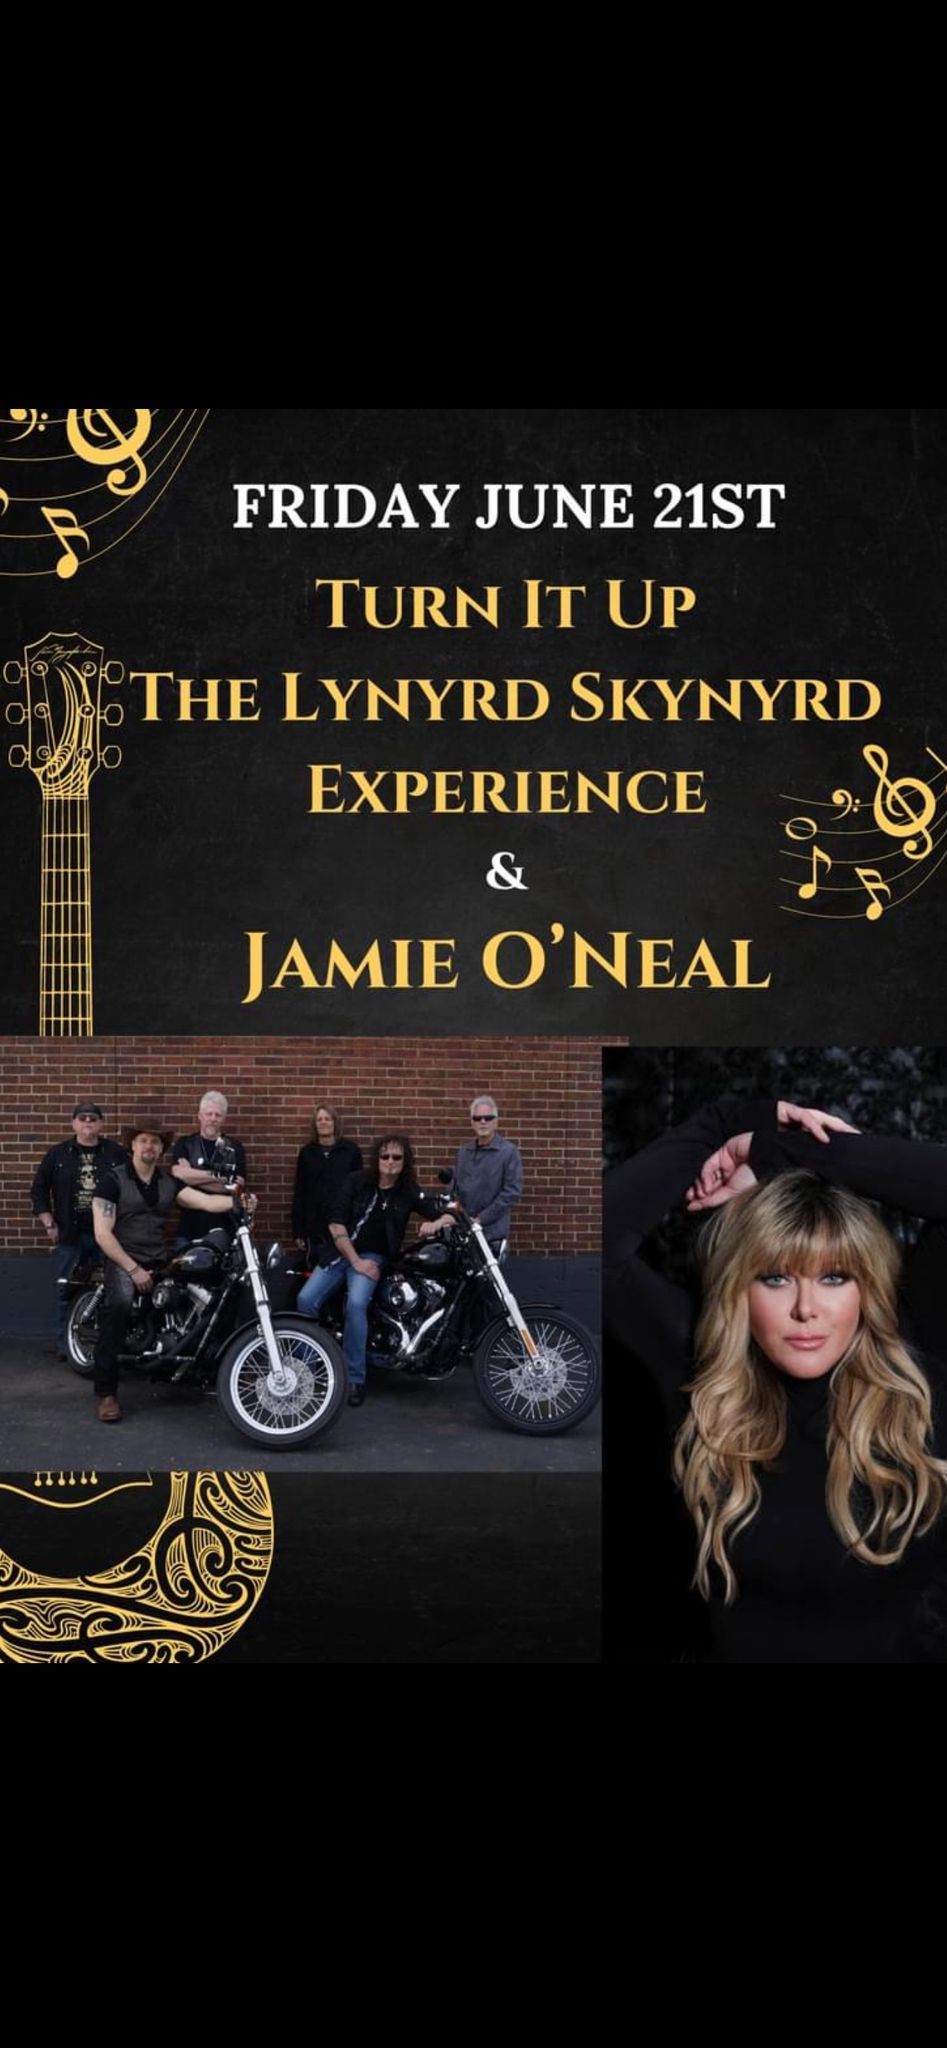 Turn It Up, The Lynyrd Skynyrd Experience at The West Virginia Coal Festival